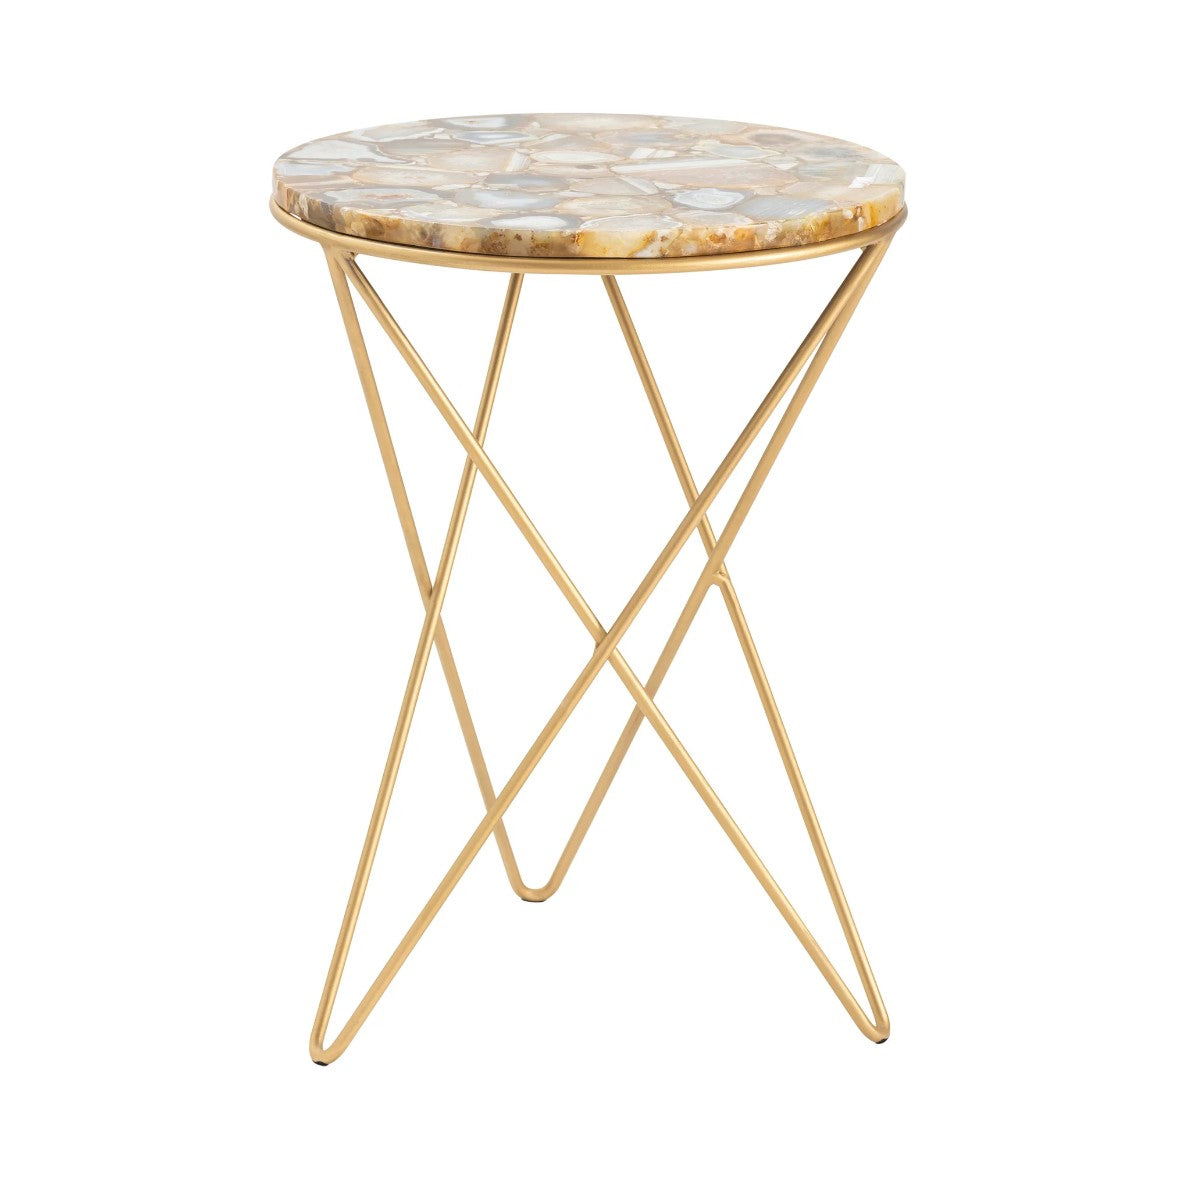 Crestview Collection Olivia 17" x 17" x 23" Modern Marble And Iron Accent Table In Marble and Gold Finish